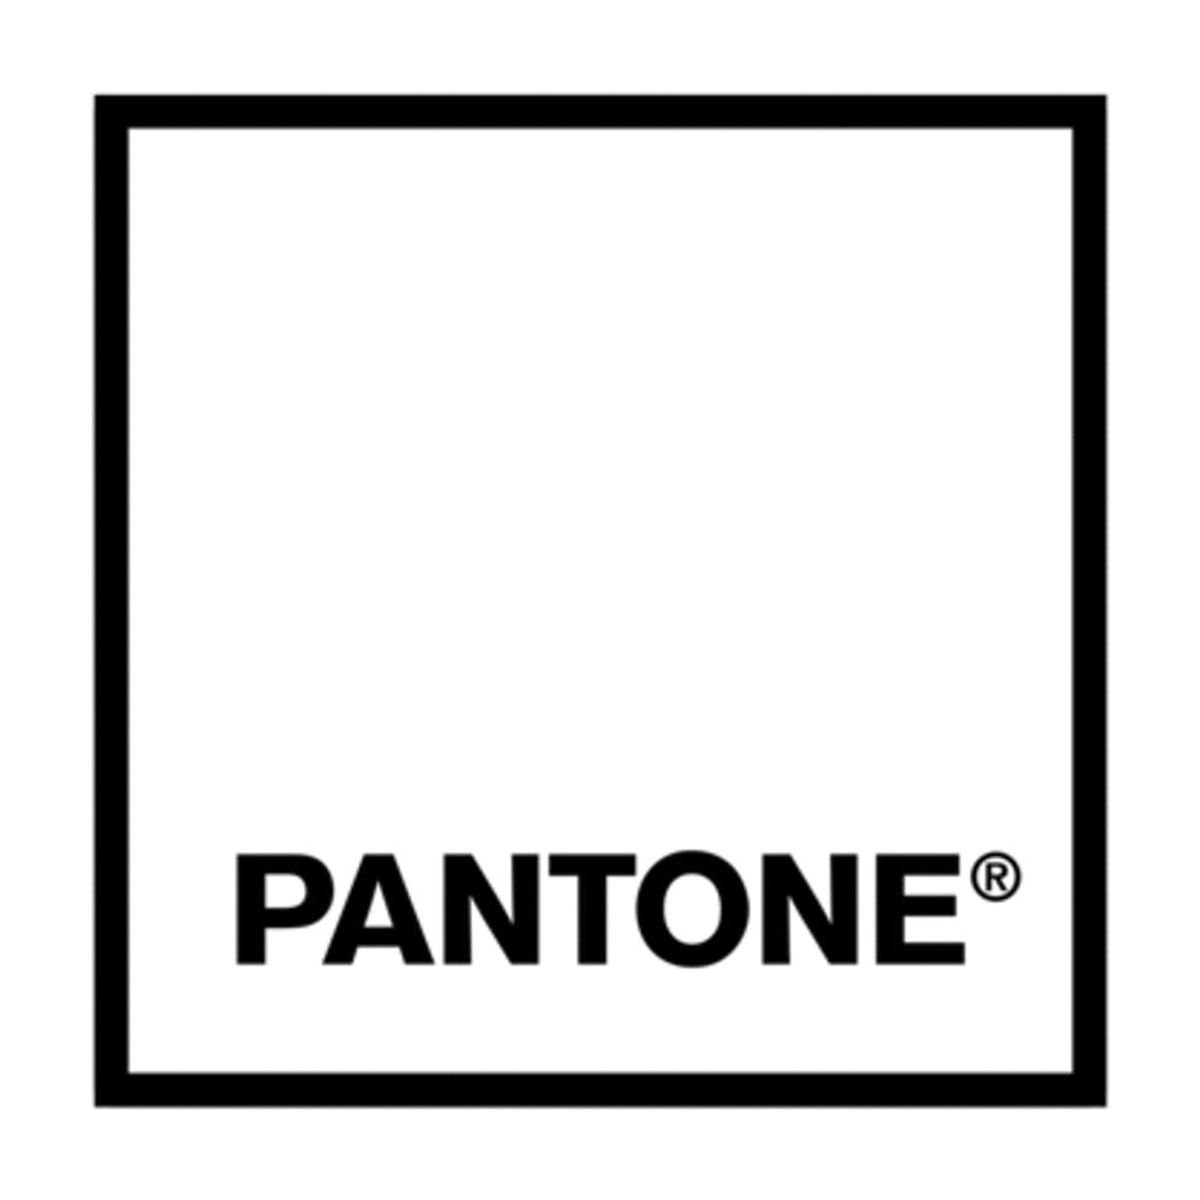 Pantone Reveals 2 Surprising Colors of the Year for the First Time Ever